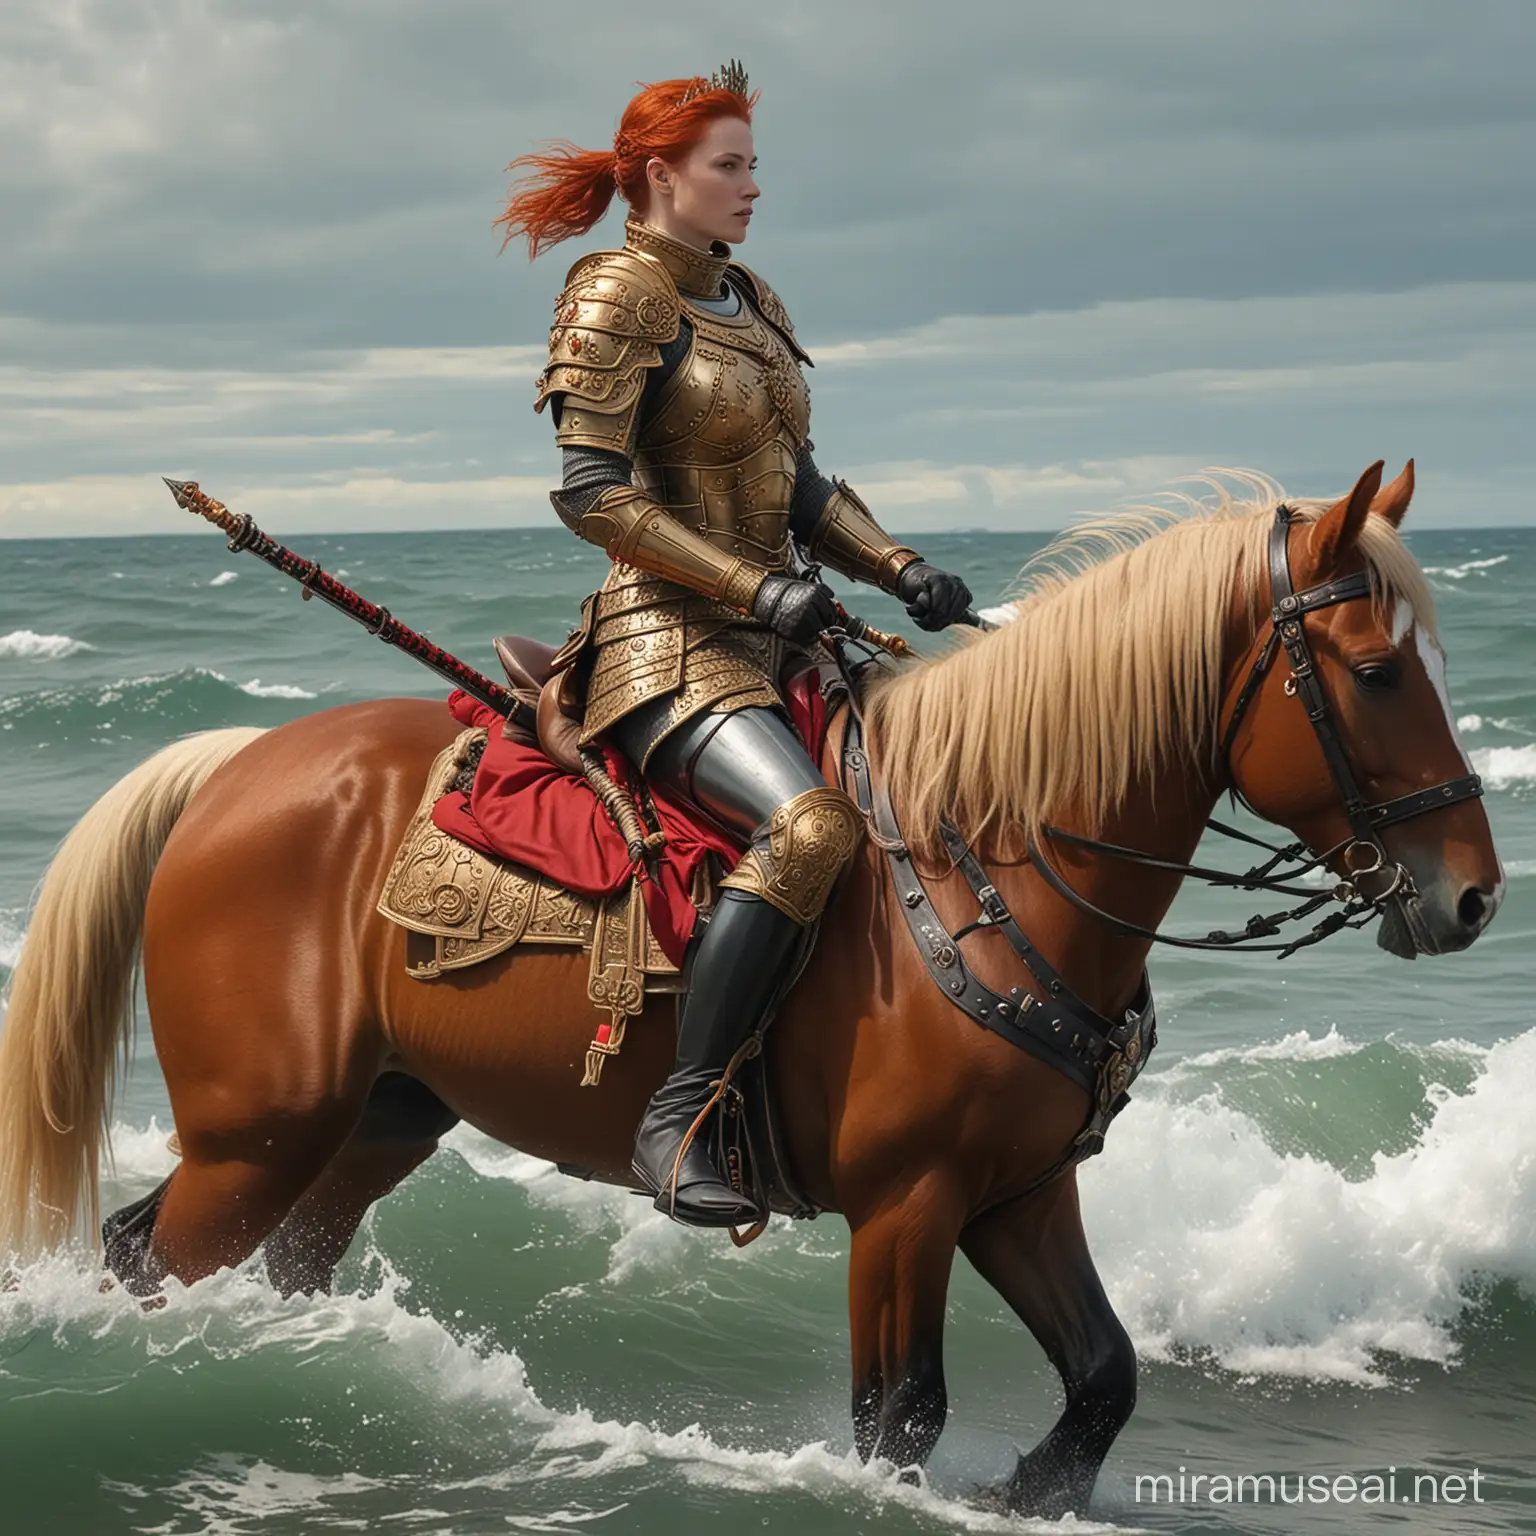 the red-crowned queen is on her horse, wearing her armour and watching her pilots in the sea with her sword  